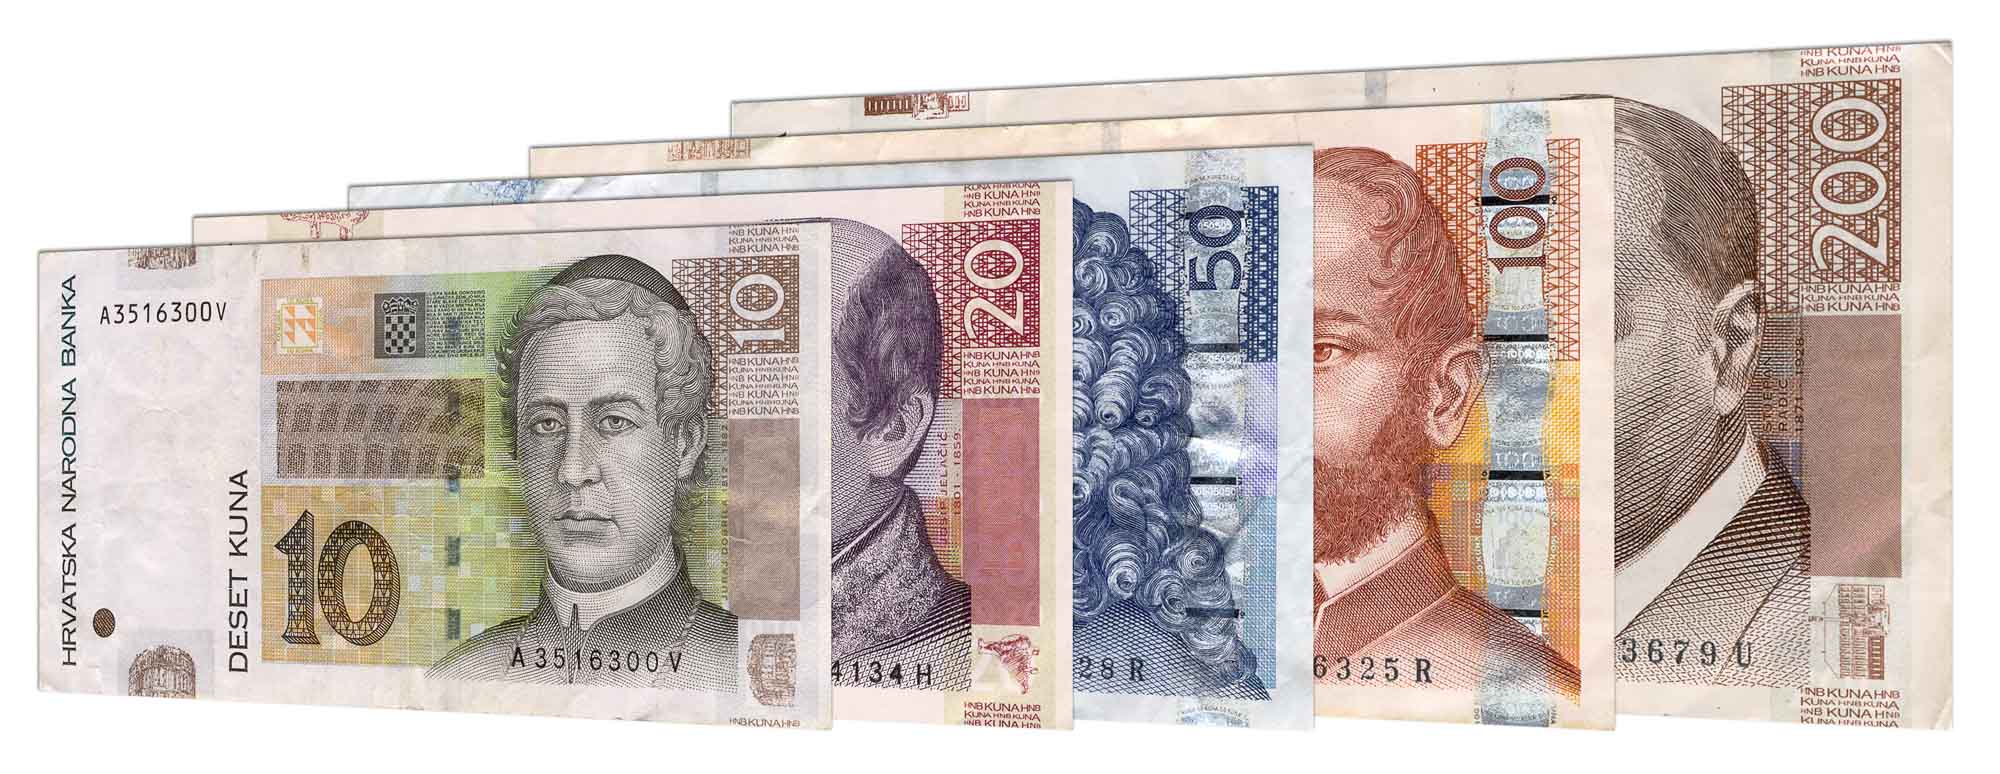 Croatian Kuna banknotes accepted for exchange